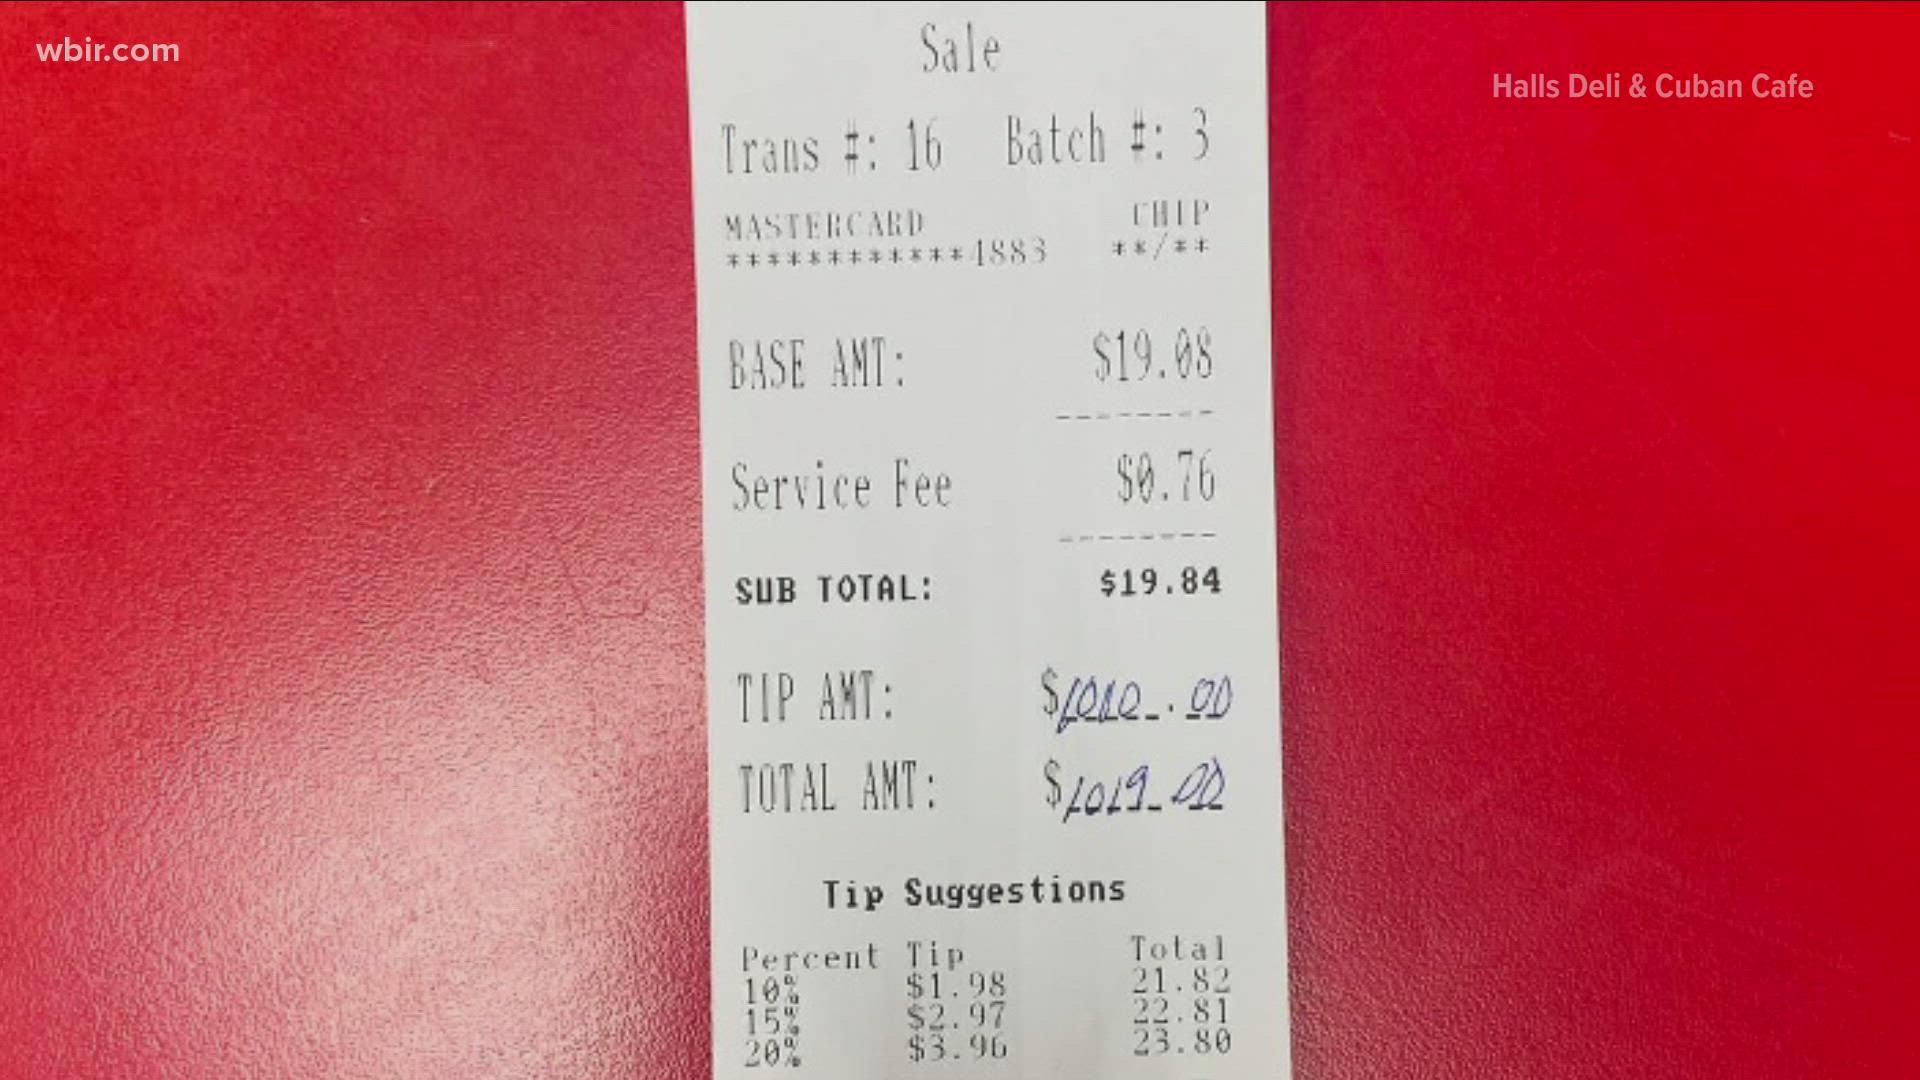 Halls Deli and Cuban Cafe off Maynardville Pike said someone dropped a $1,000 tip on a roughly $20 check Wednesday.